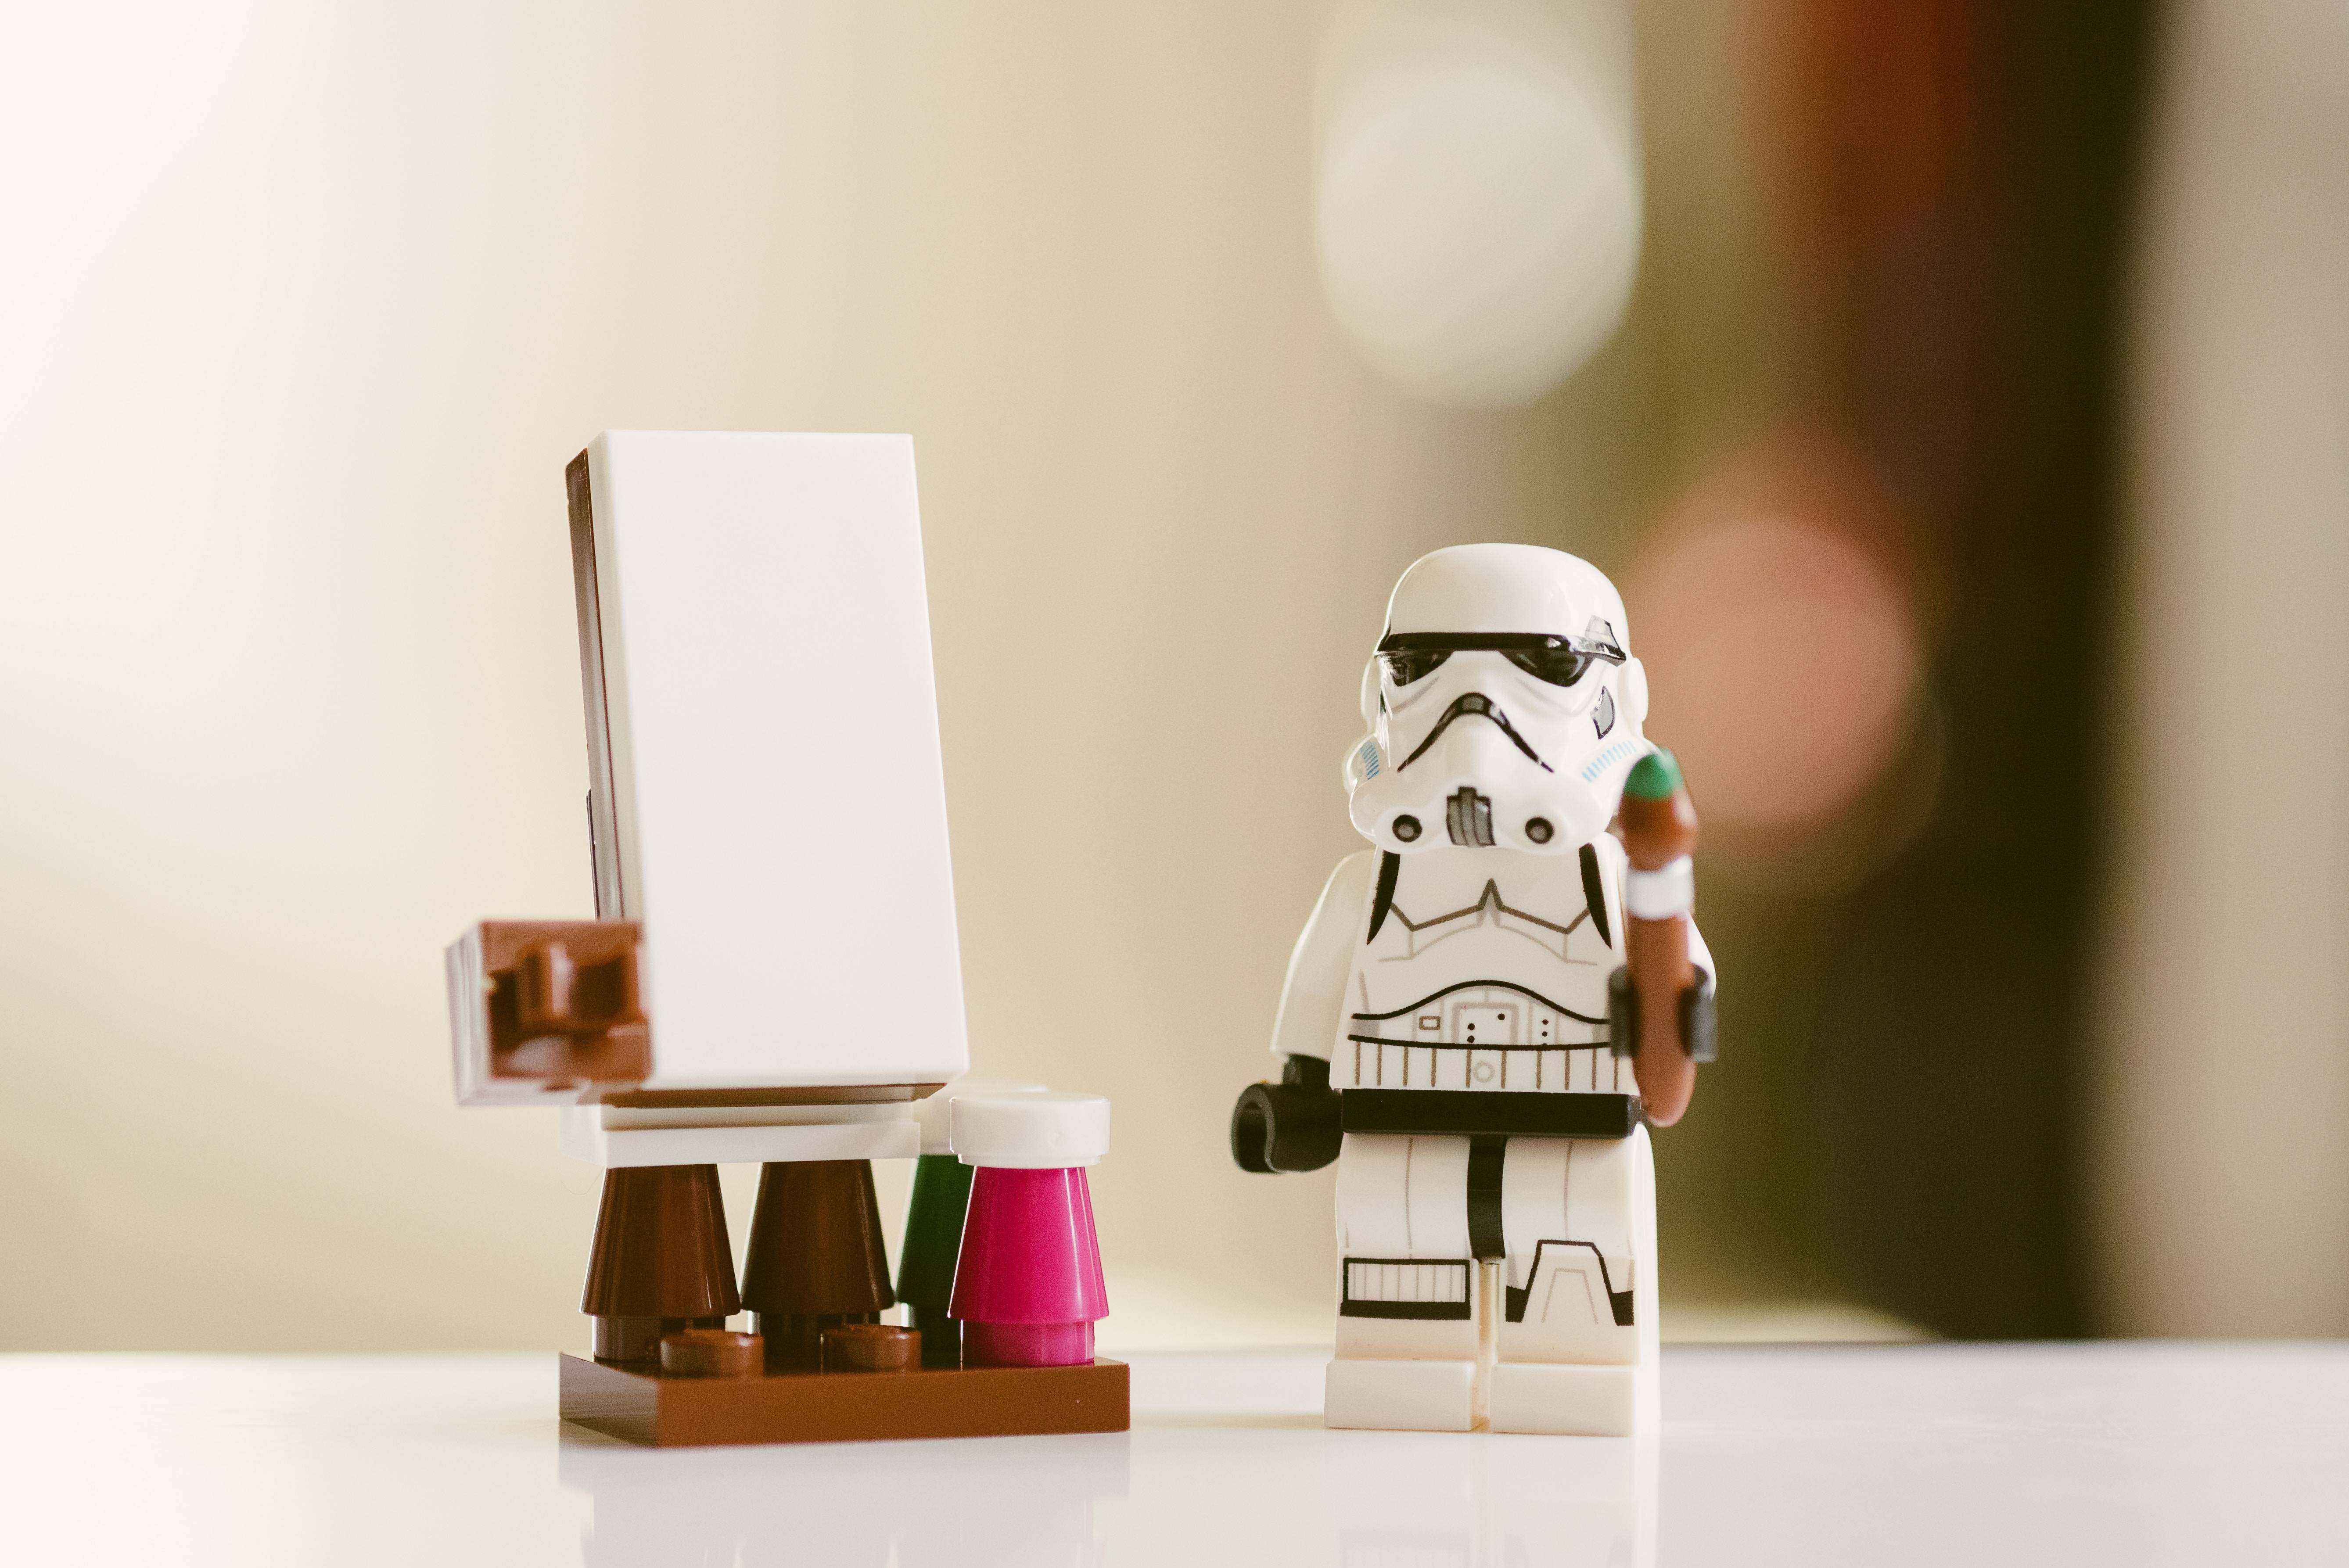 Lego Stormtrooper getting ready to make art